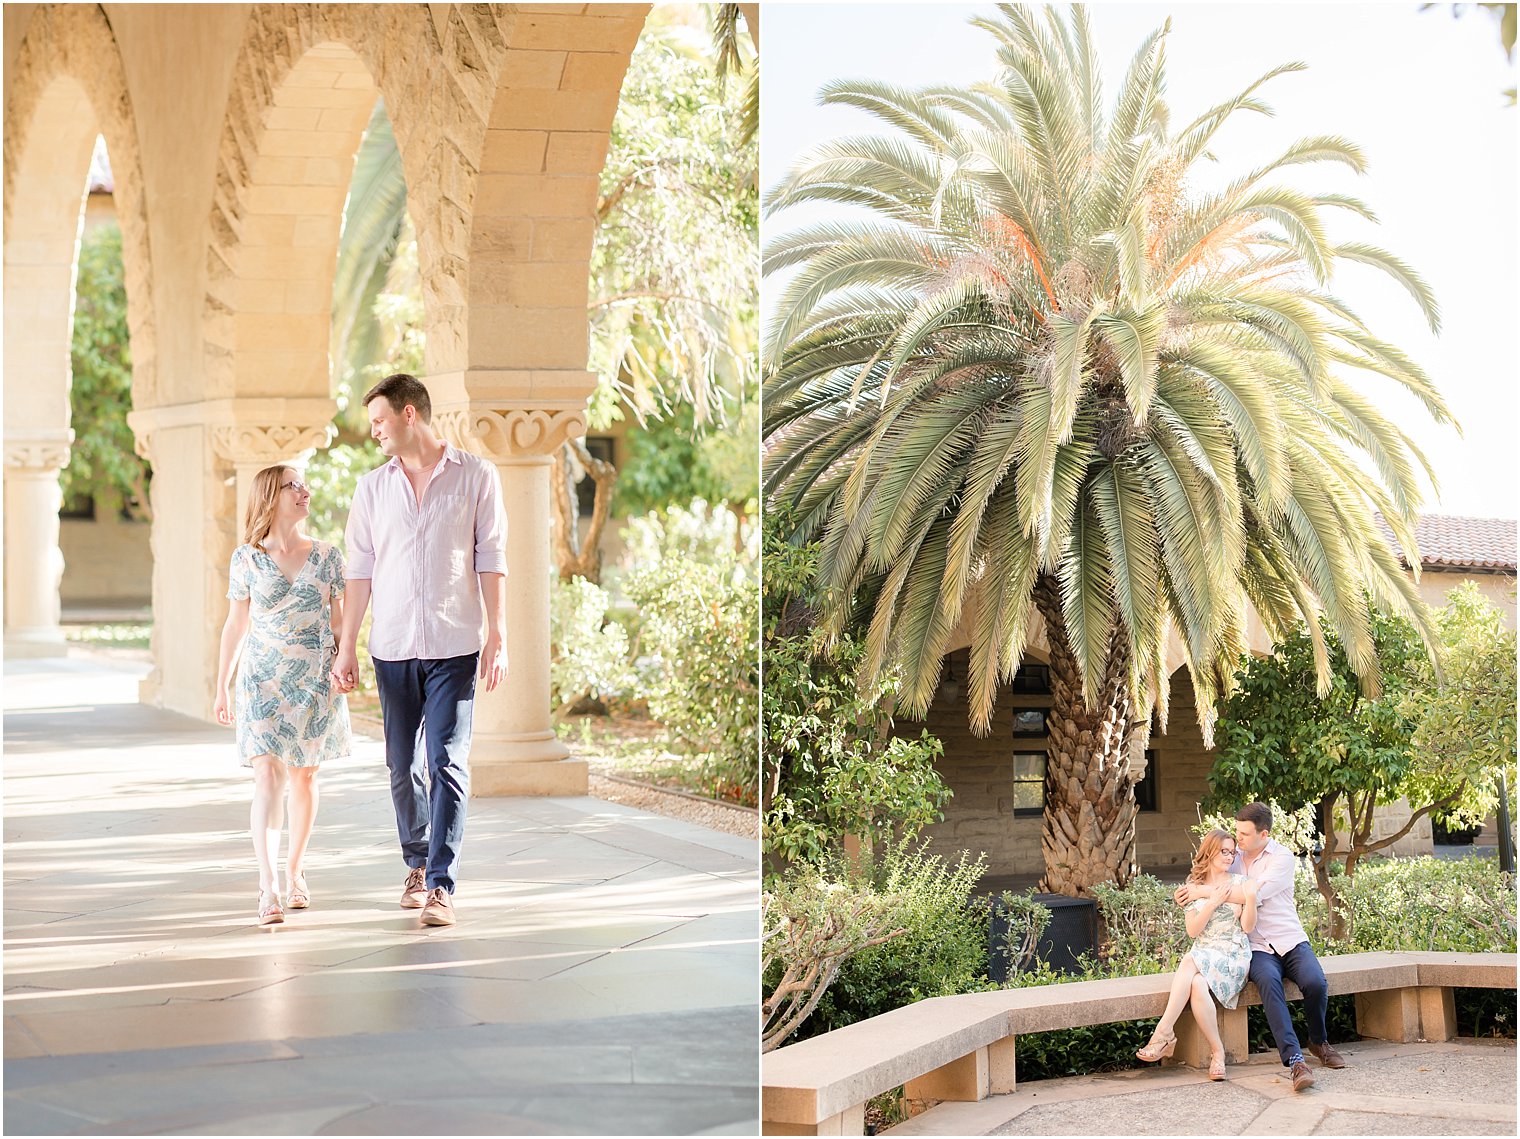 Engagement photos with palm trees and arches